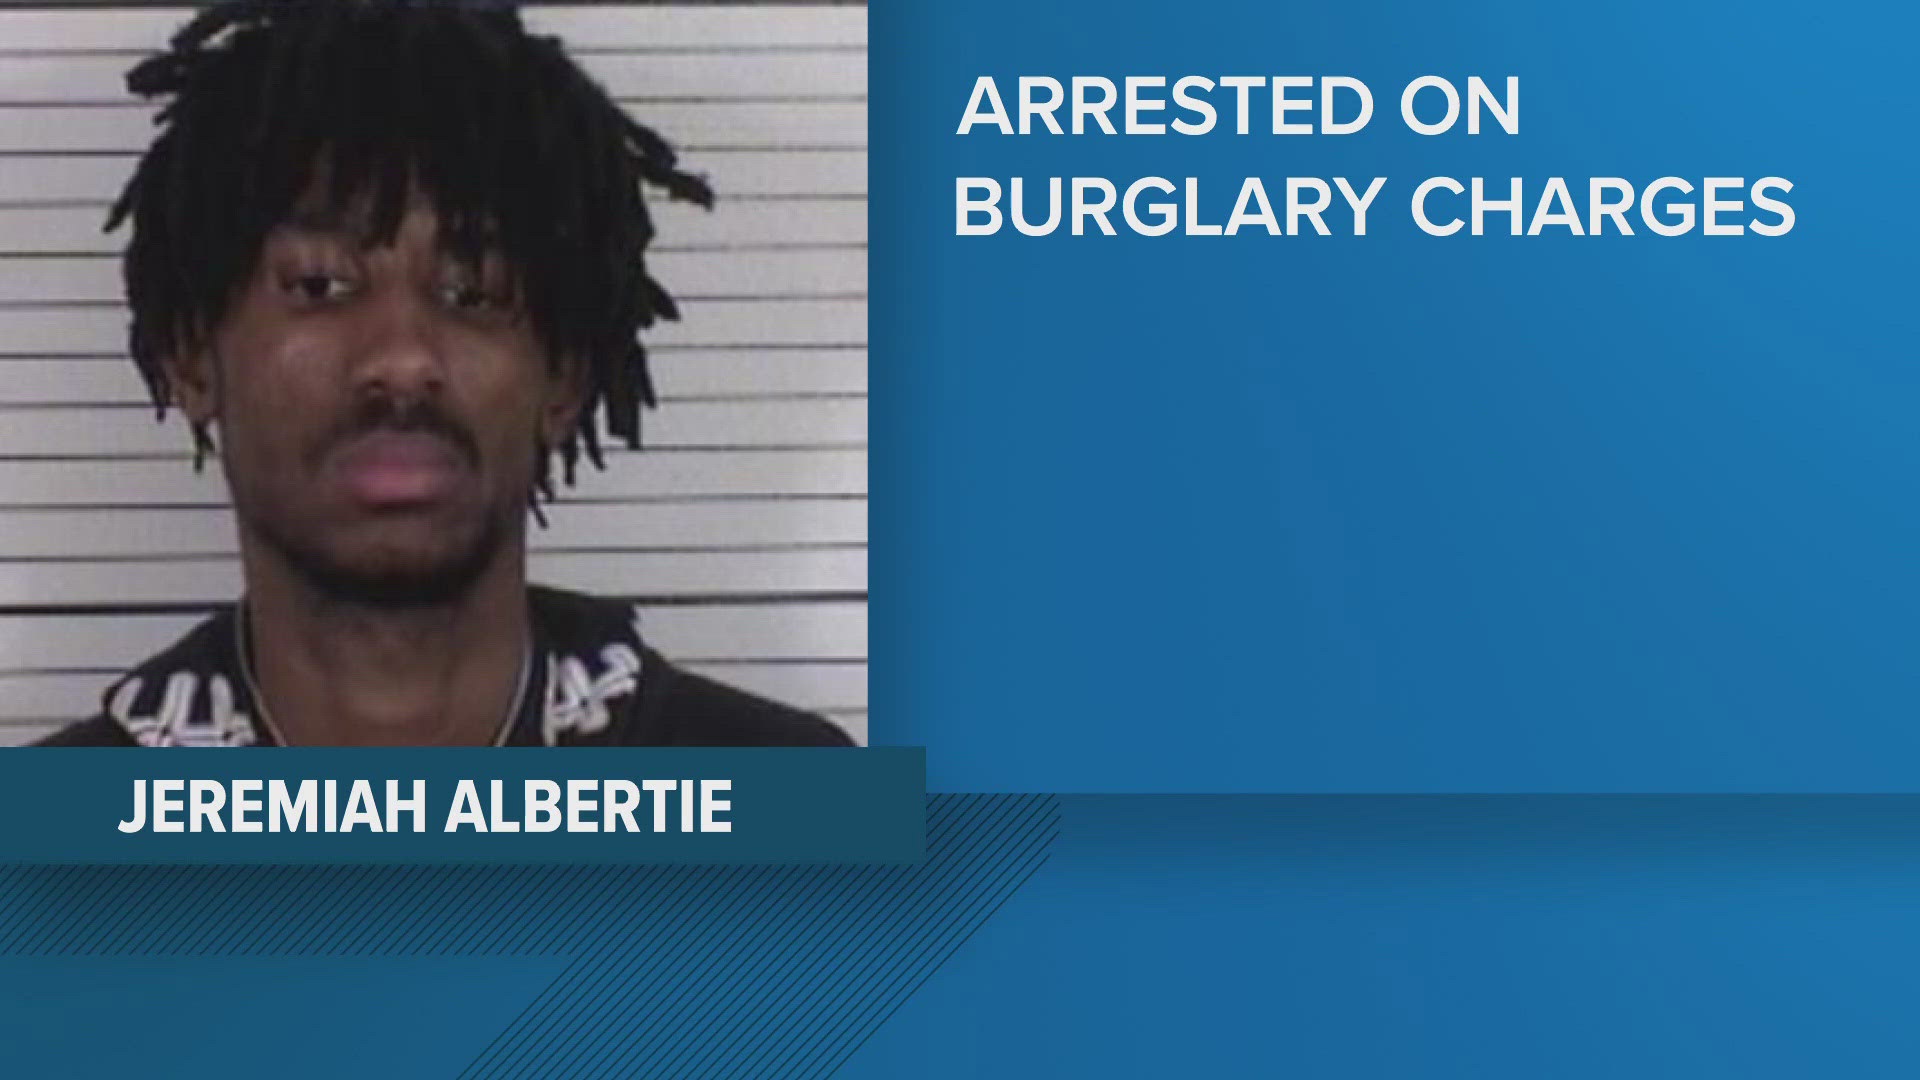 Police say Jeremiah Albertie was found breaking and entering into a St. Marys GameStop on Wednesday.